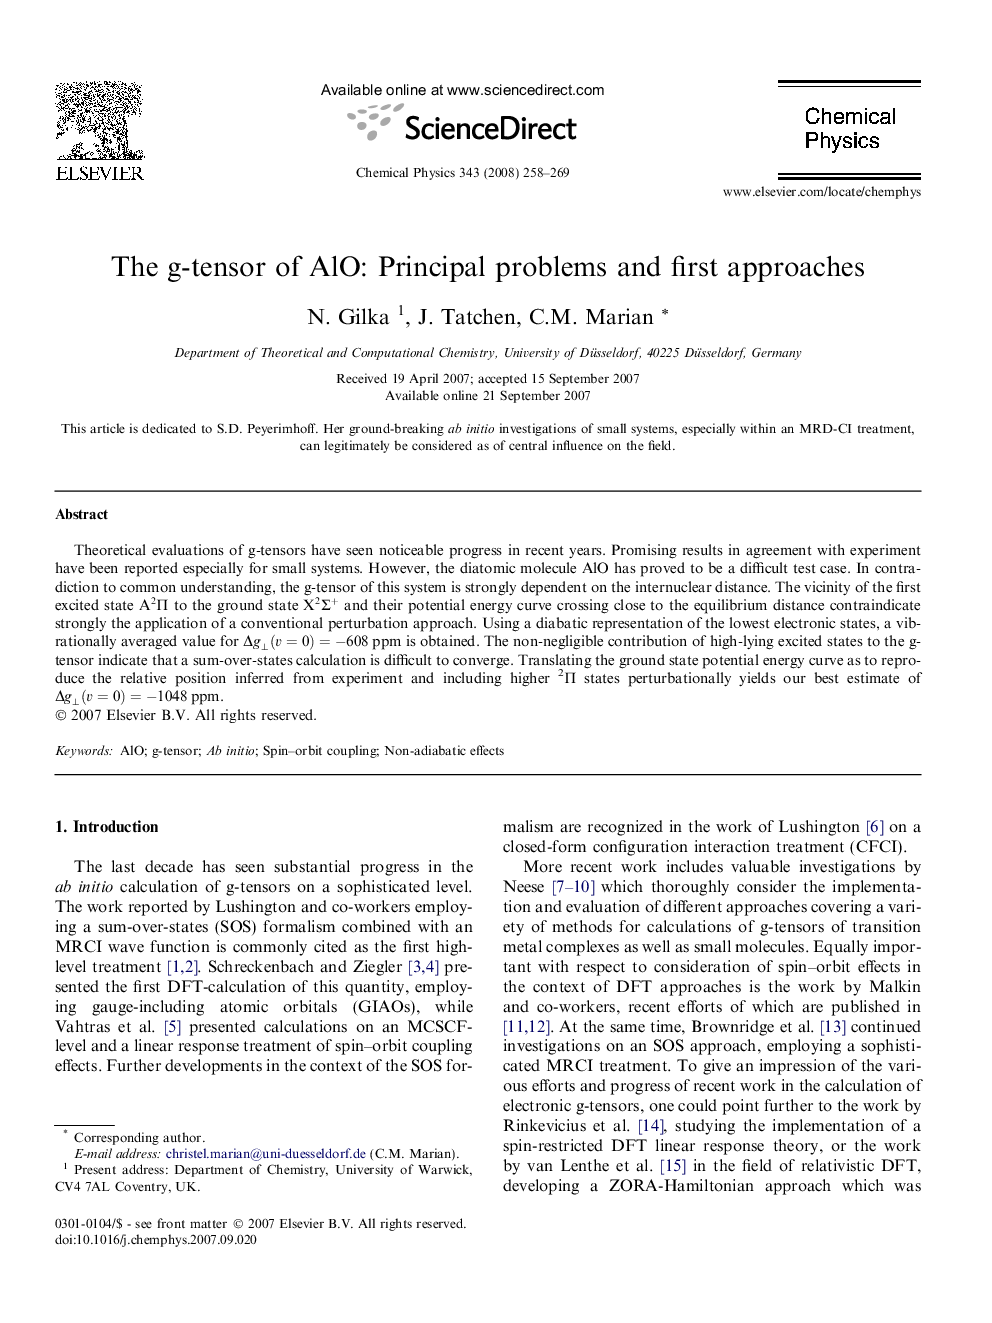 The g-tensor of AlO: Principal problems and first approaches